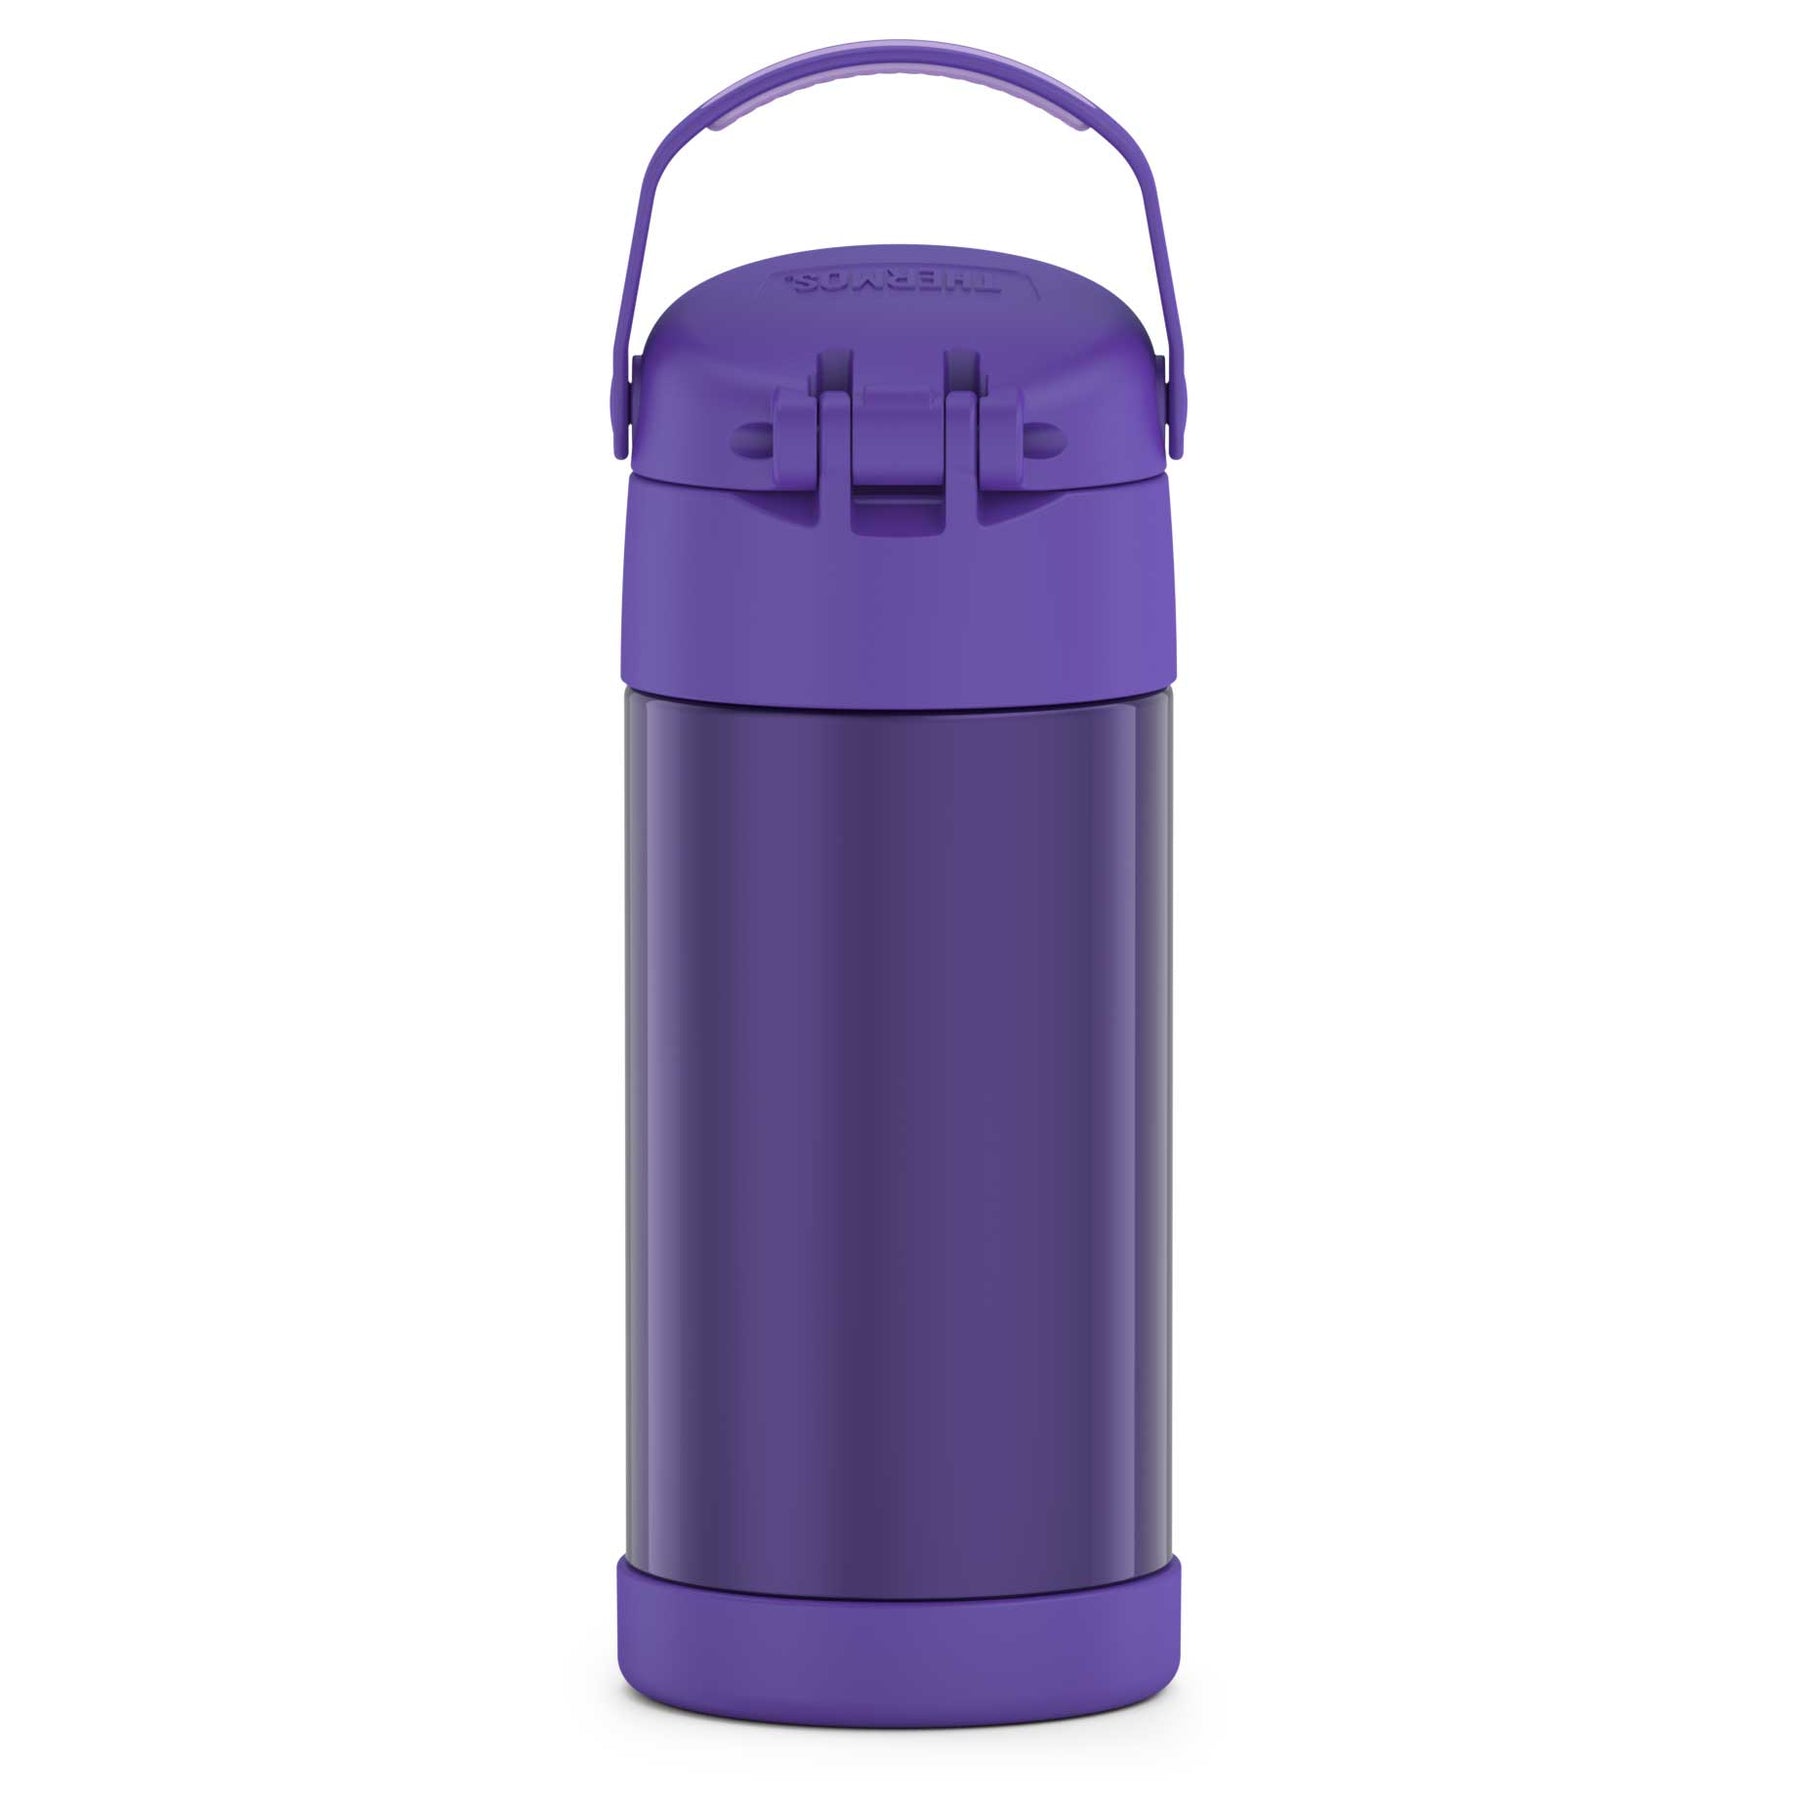 Real Living Purple Stainless Steel Soup Thermos, 13 Oz.